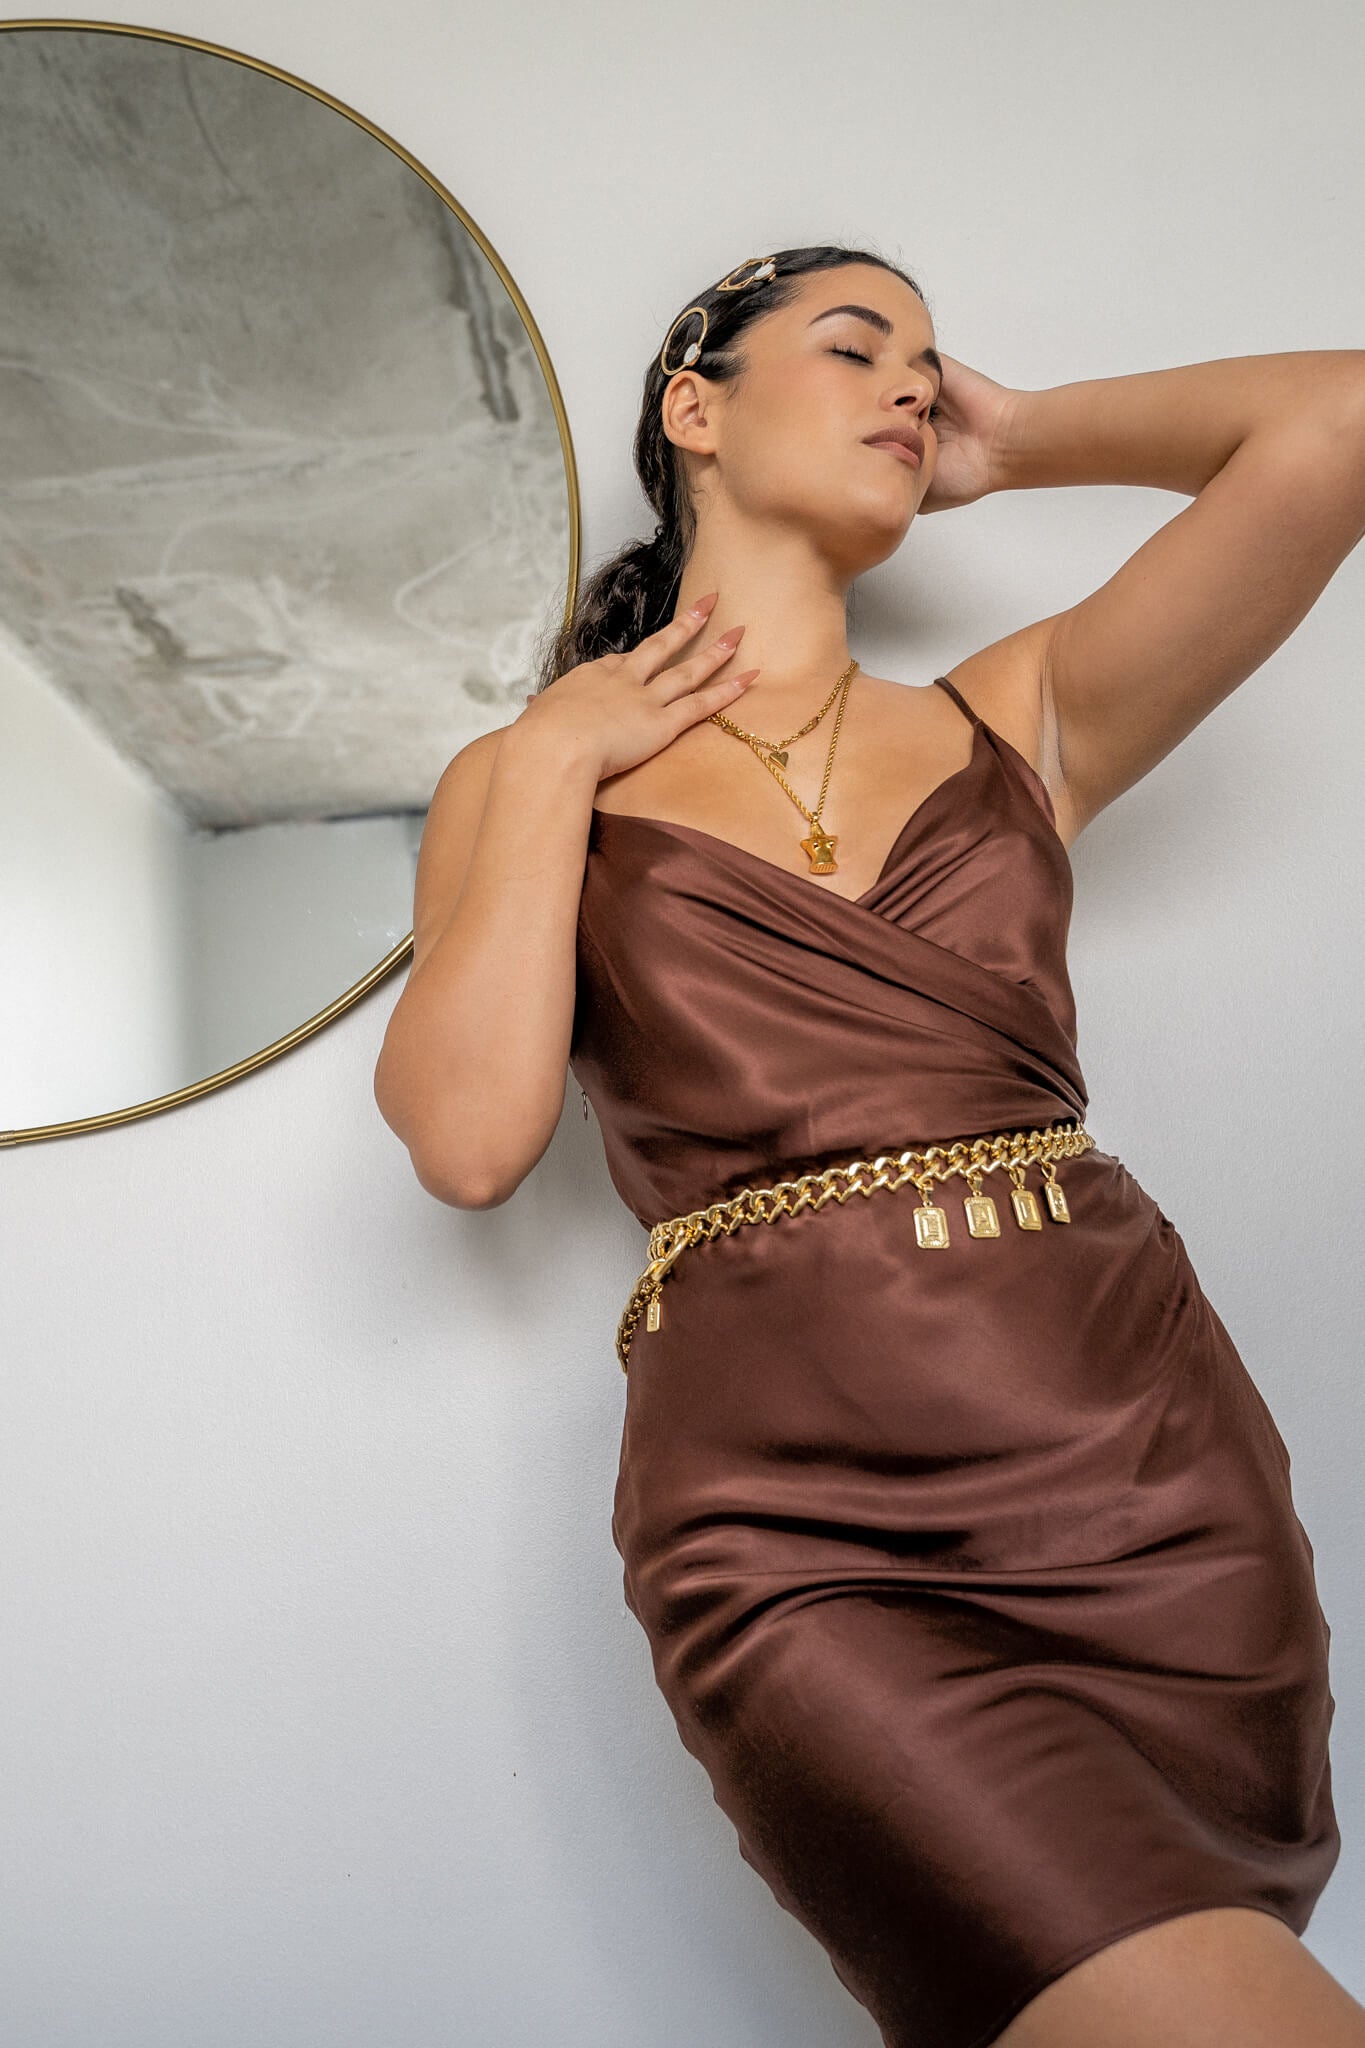 Model in brown silky dress wearing Gold Lapo charm chain belt by the mirror on the wall